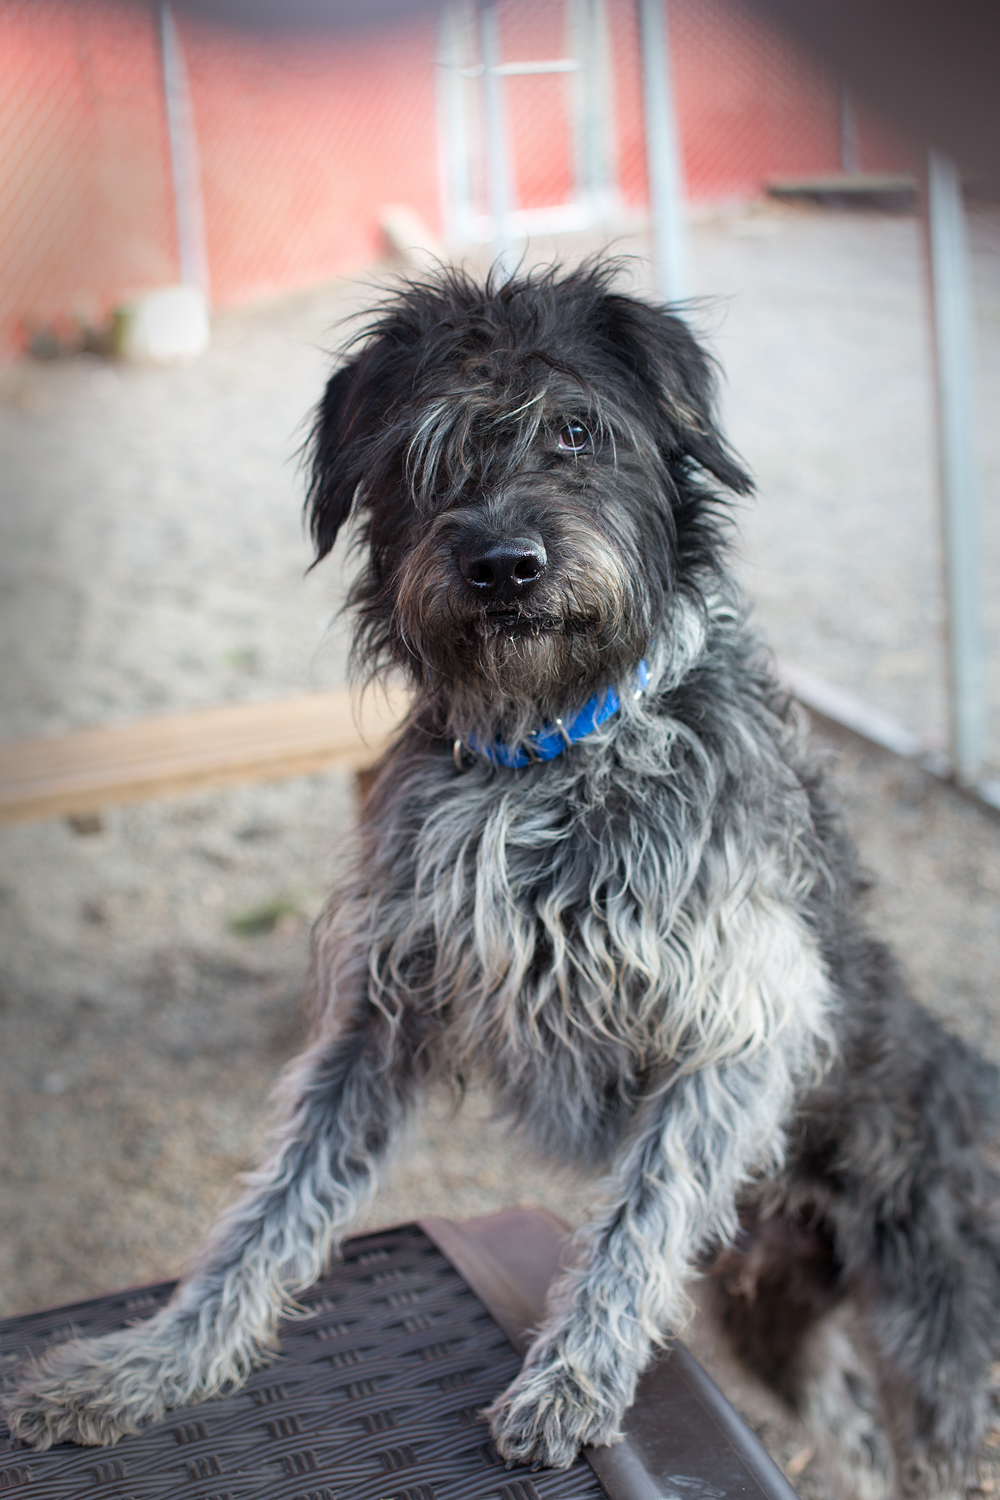 "GRIFF" shaggy easy going Wirehaired Griffon Pointer mix.